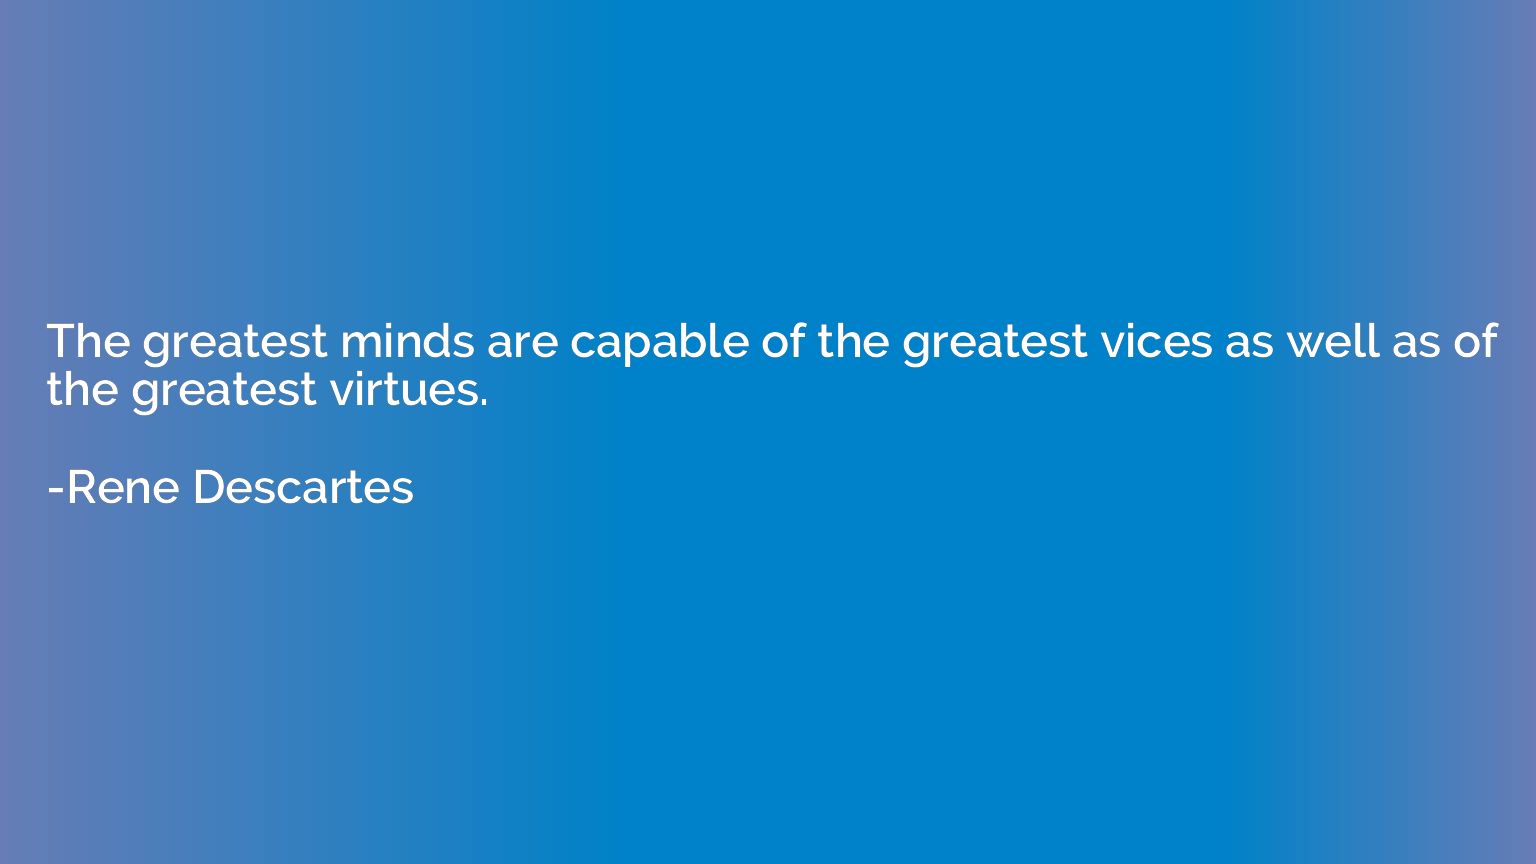 The greatest minds are capable of the greatest vices as well